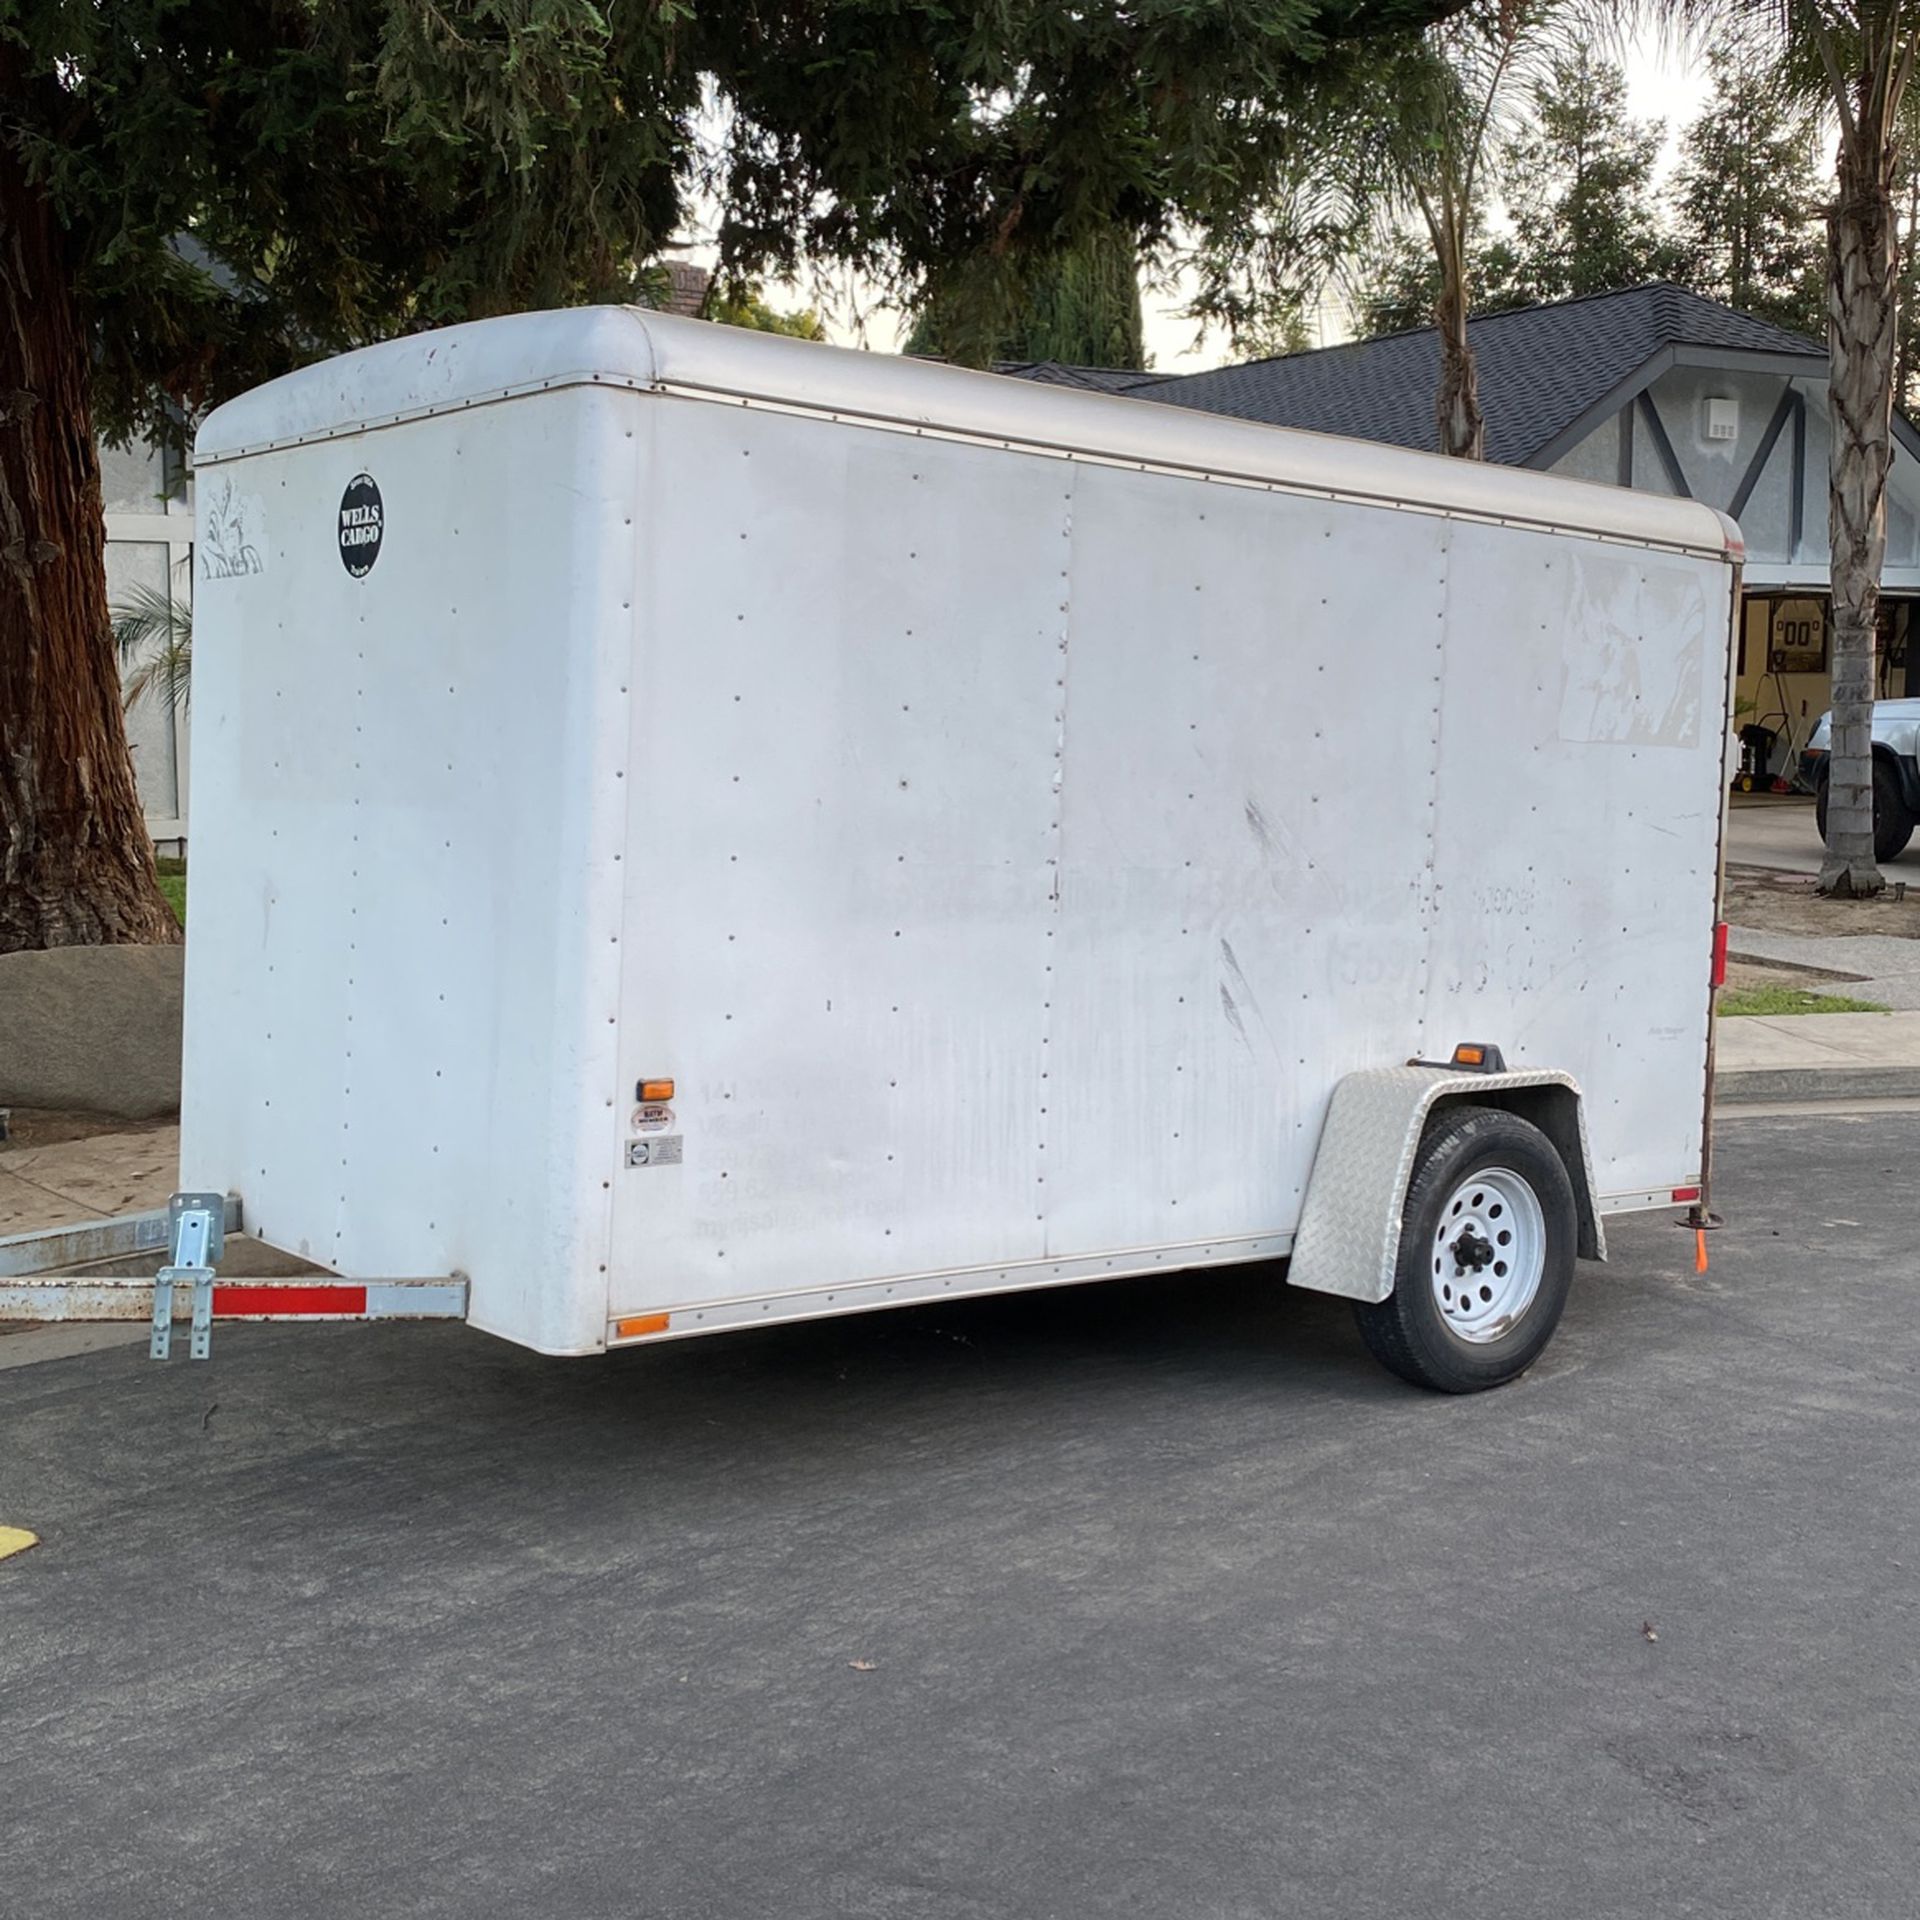 6x12 Wells Cargo Enclosed Trailer With Drop Gate for Sale in Visalia, CA - OfferUp Wells Cargo 6x12 Enclosed Trailer For Sale